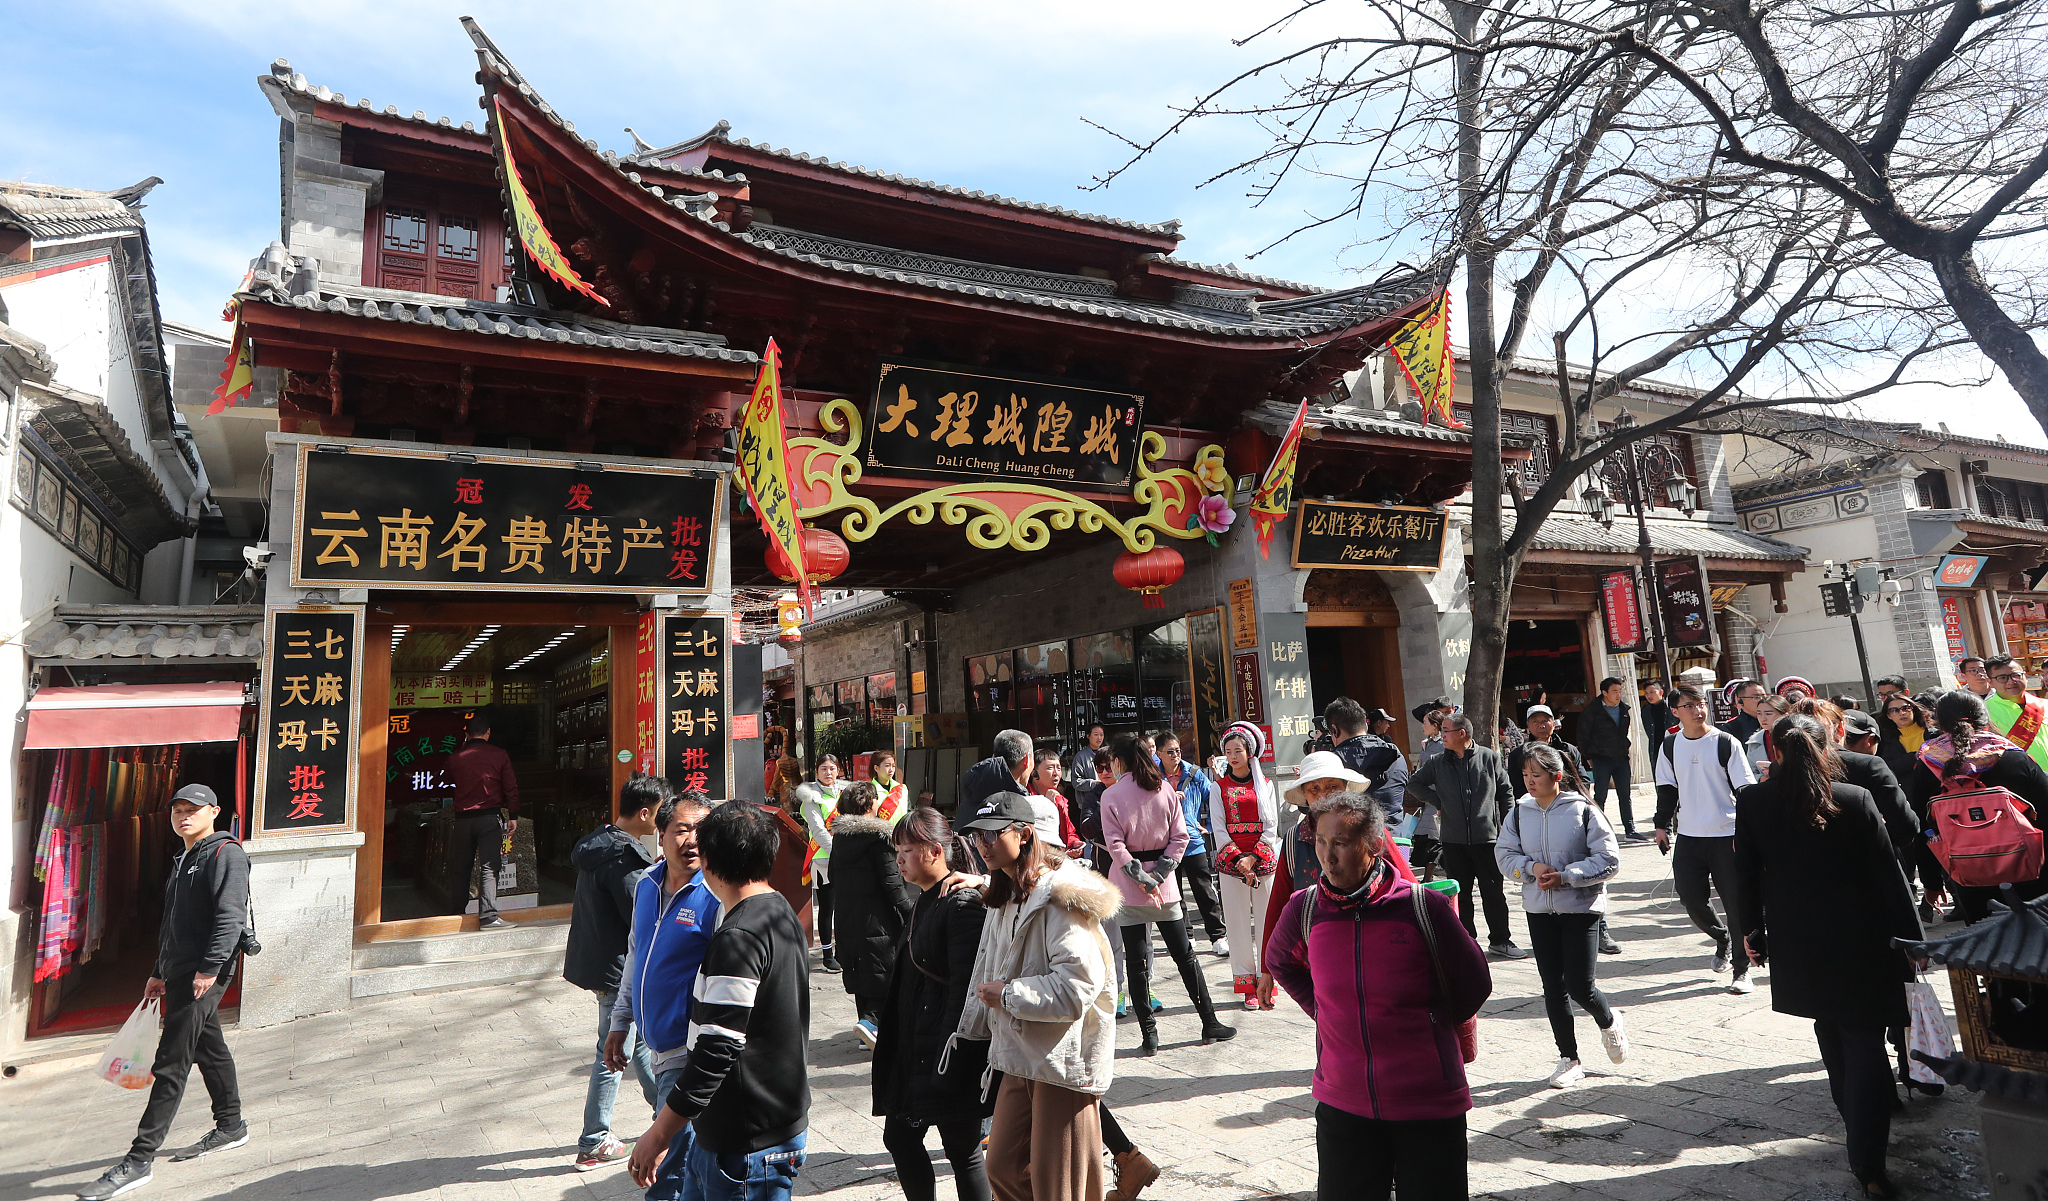 According to statistics, Yunnan Province received the second most tourists in the nation with a tourism revenue of 38.4 billion yuan ($5.35 billion) during 2024 Spring Festival holiday. /CFP